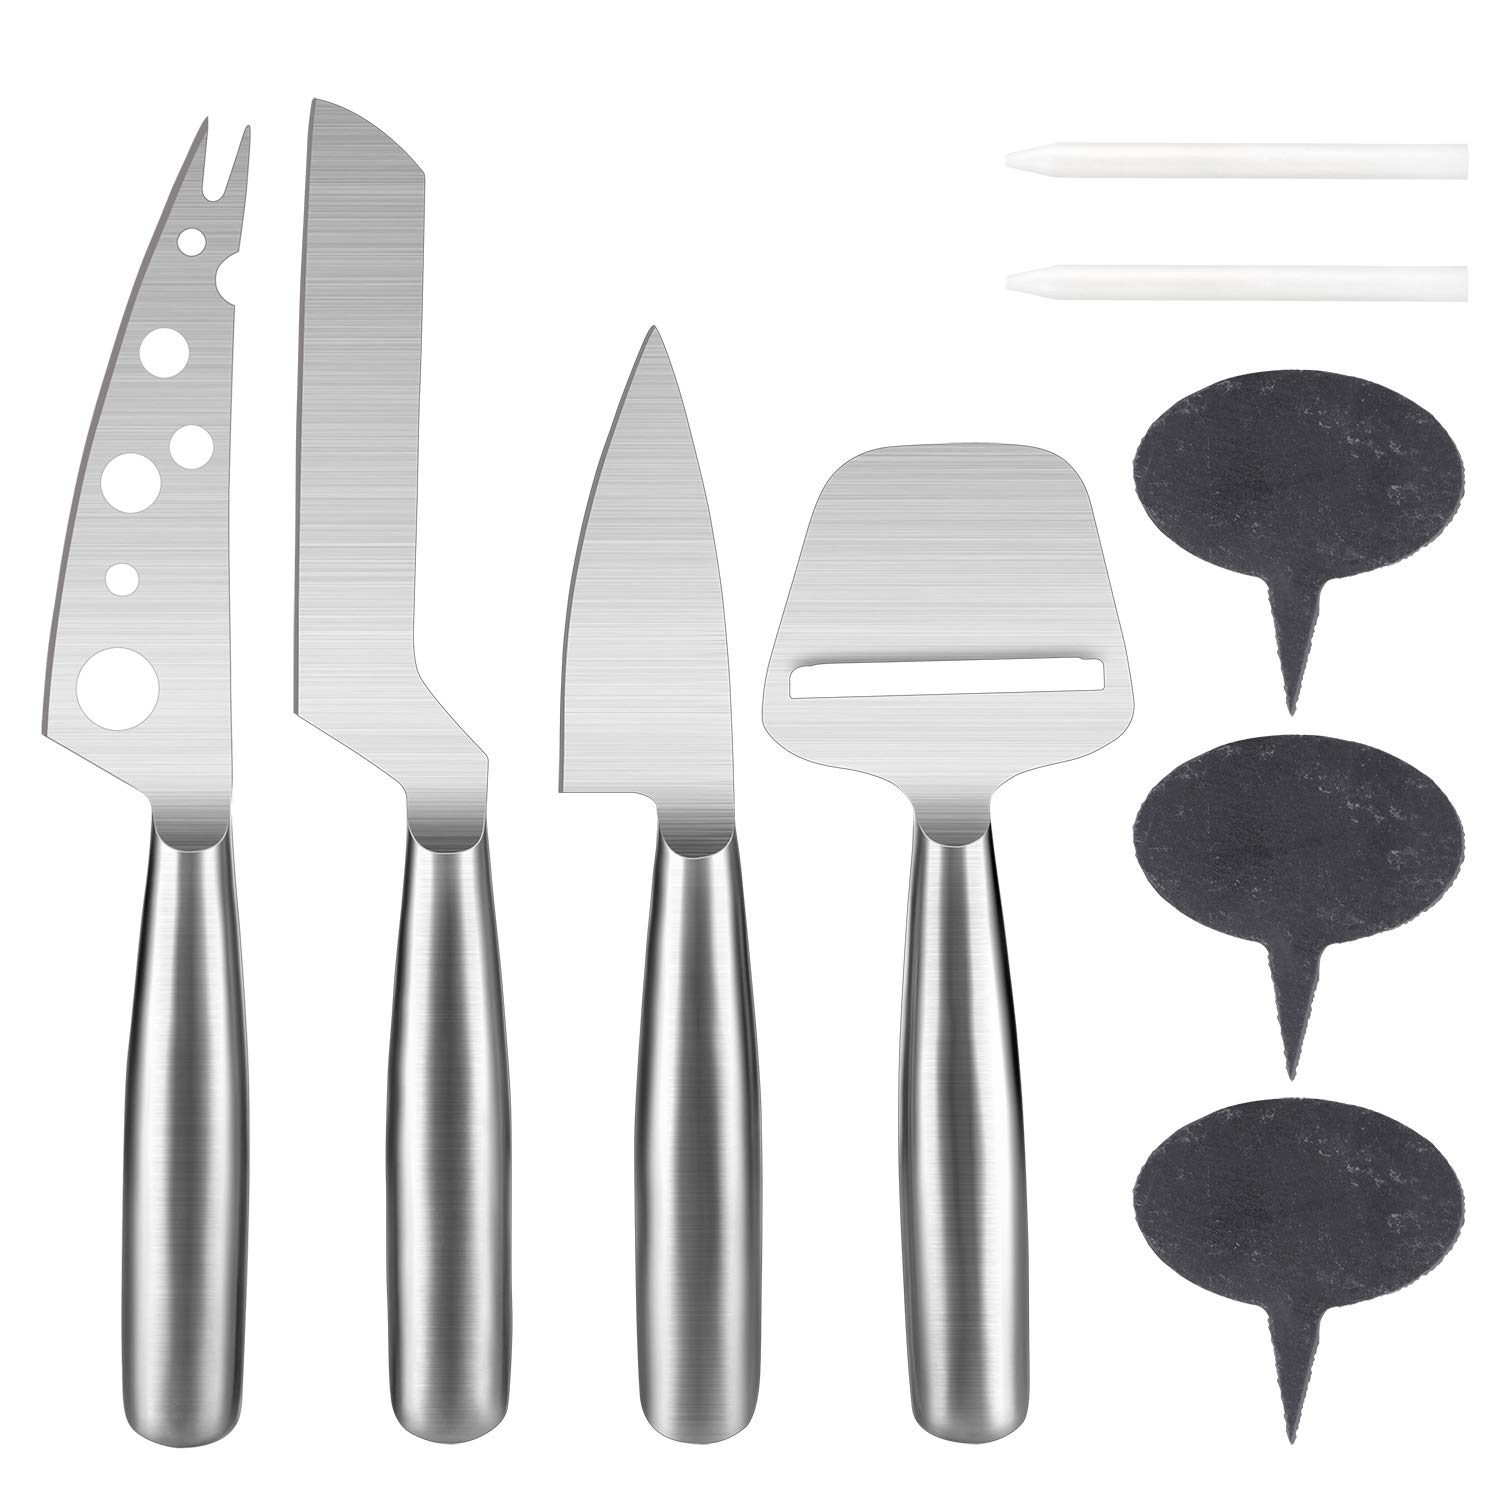 WoneNice Cheese Knives and Slate Markers Set - Collection Cheese Knife Gifts Set with 3 Long Handle Stainless Steel Cheese Knife & 1 Cheese Slicer & 3 Cheese Markers and 2 Soapstone Chalks